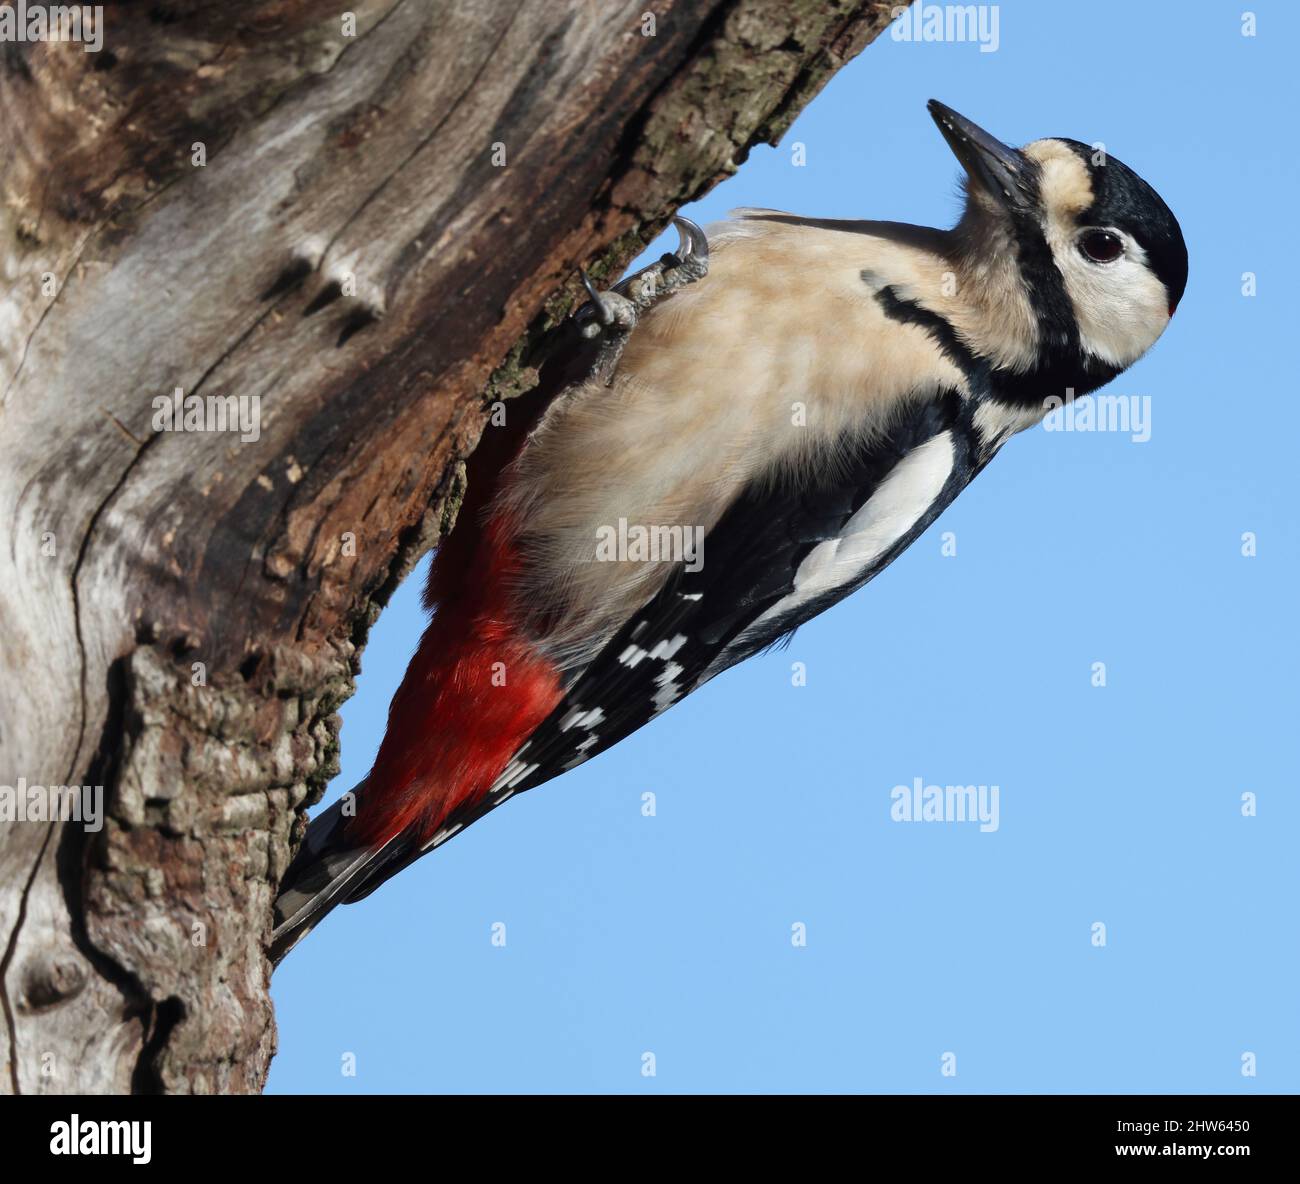 Male Great Spotted Woodpecker feeding on a tree trunk Stock Photo